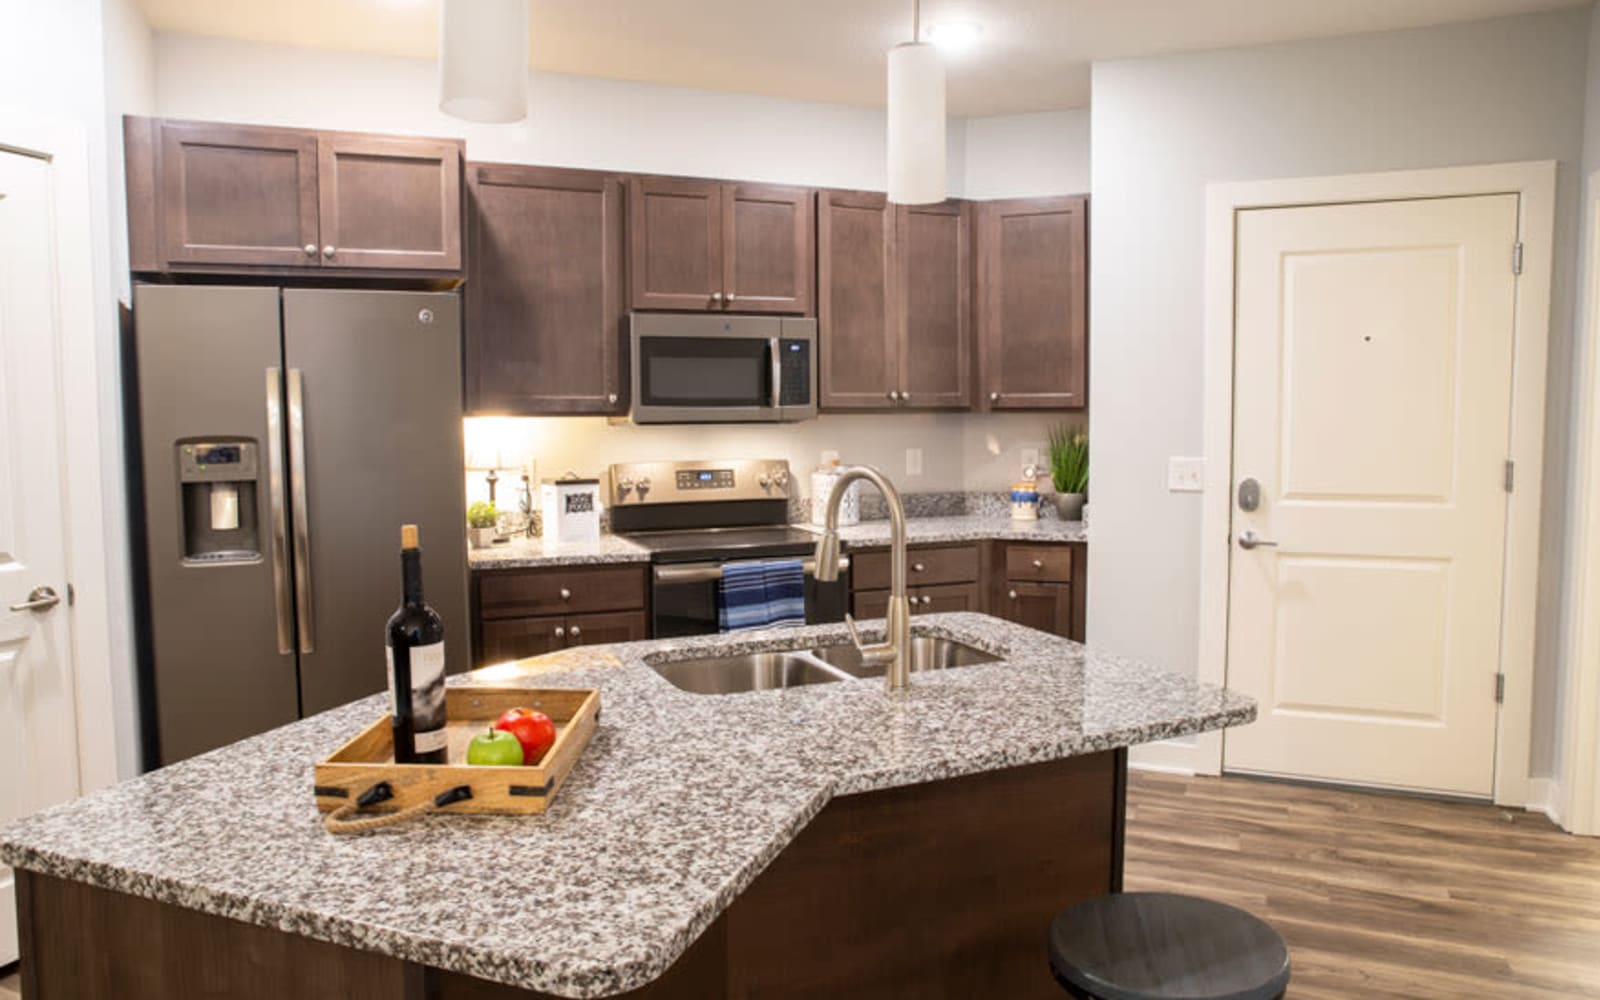 A kitchen located next to the front door in an apartment at Attivo Trail in Waukee, Iowa